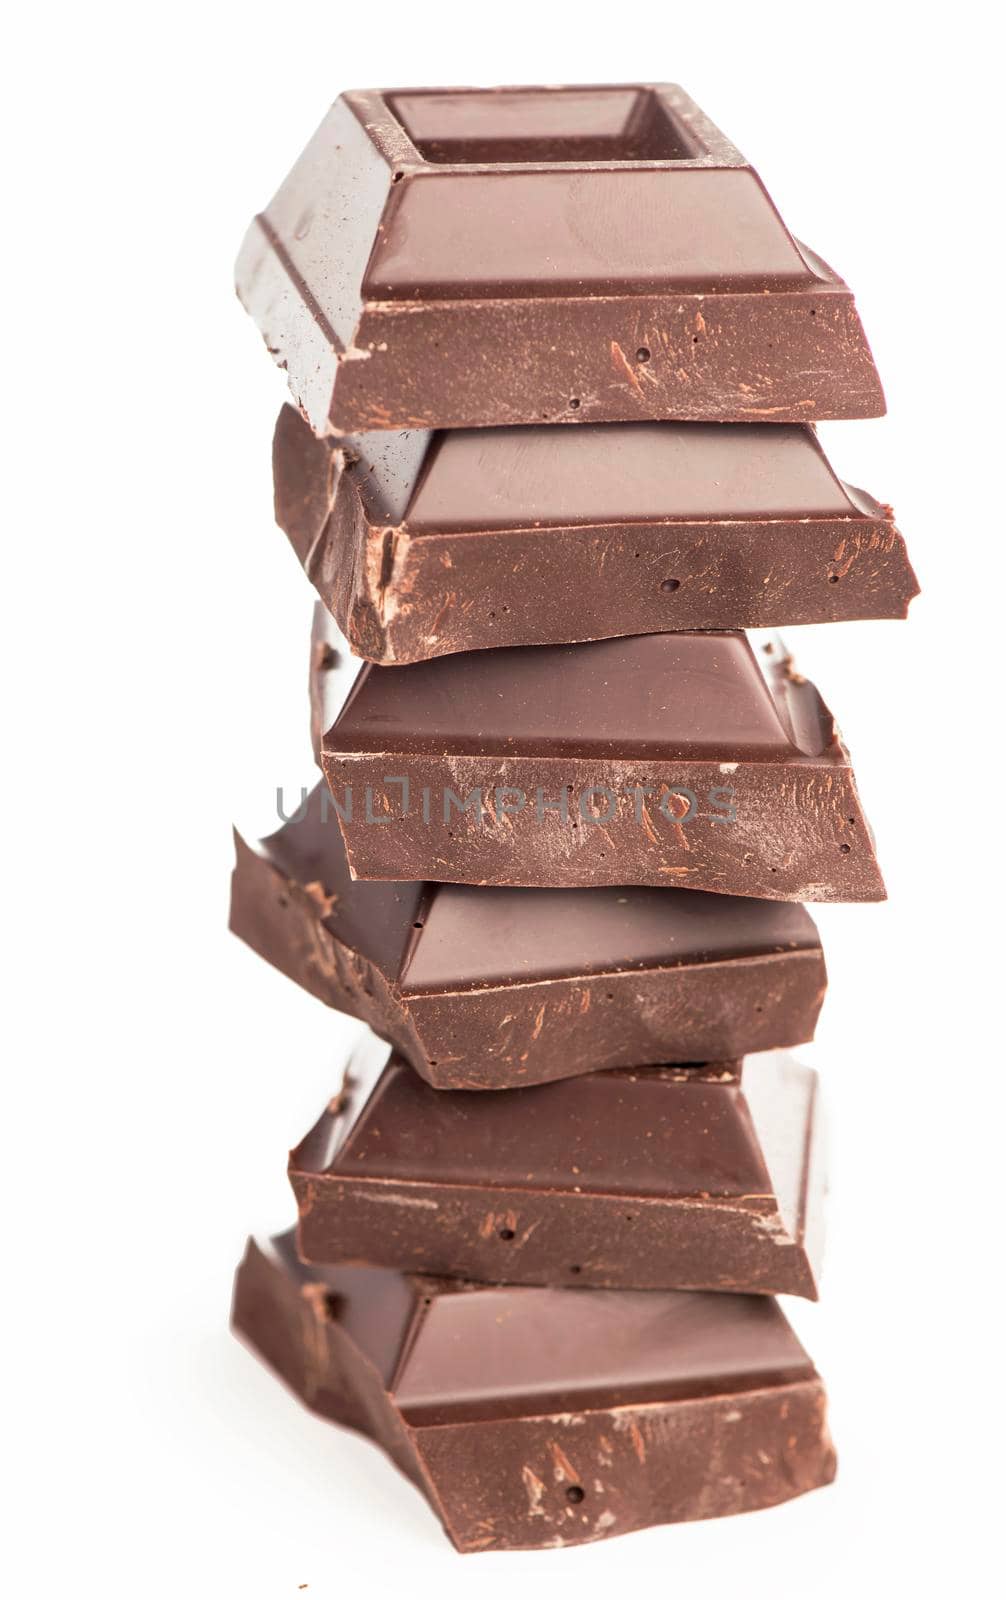 chocolate pieces isolated on white